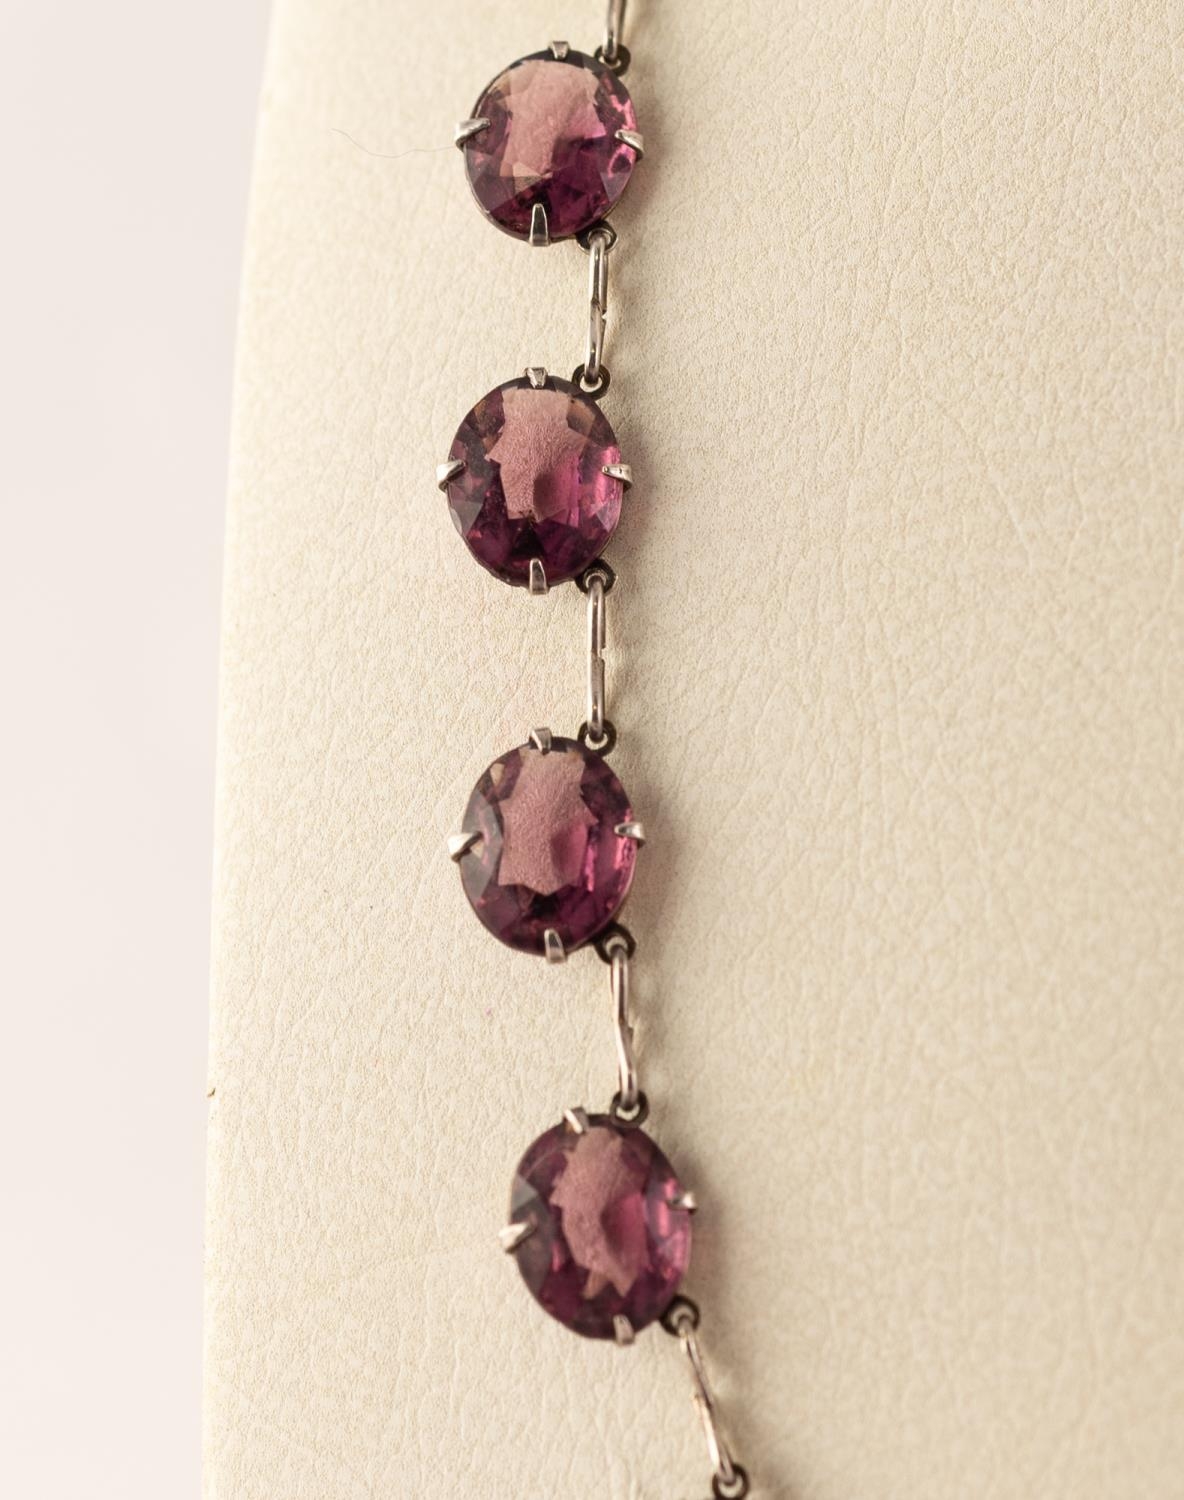 SILVER COLOURED METAL 23 STONE AMETHYST SET NECKLACE - Image 2 of 3